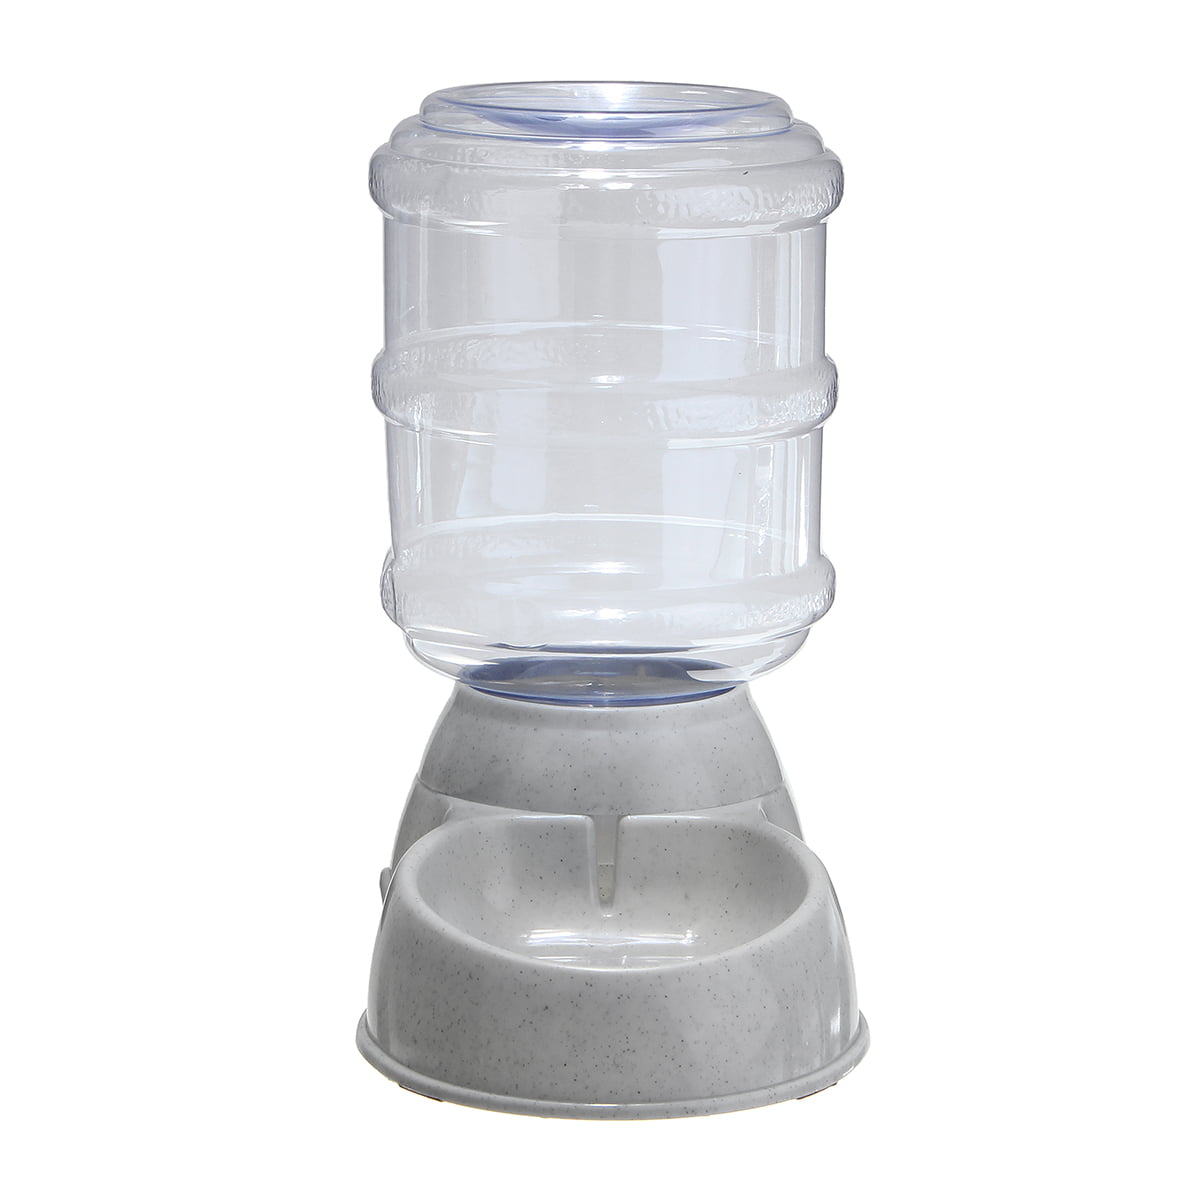 cat feeder and waterer